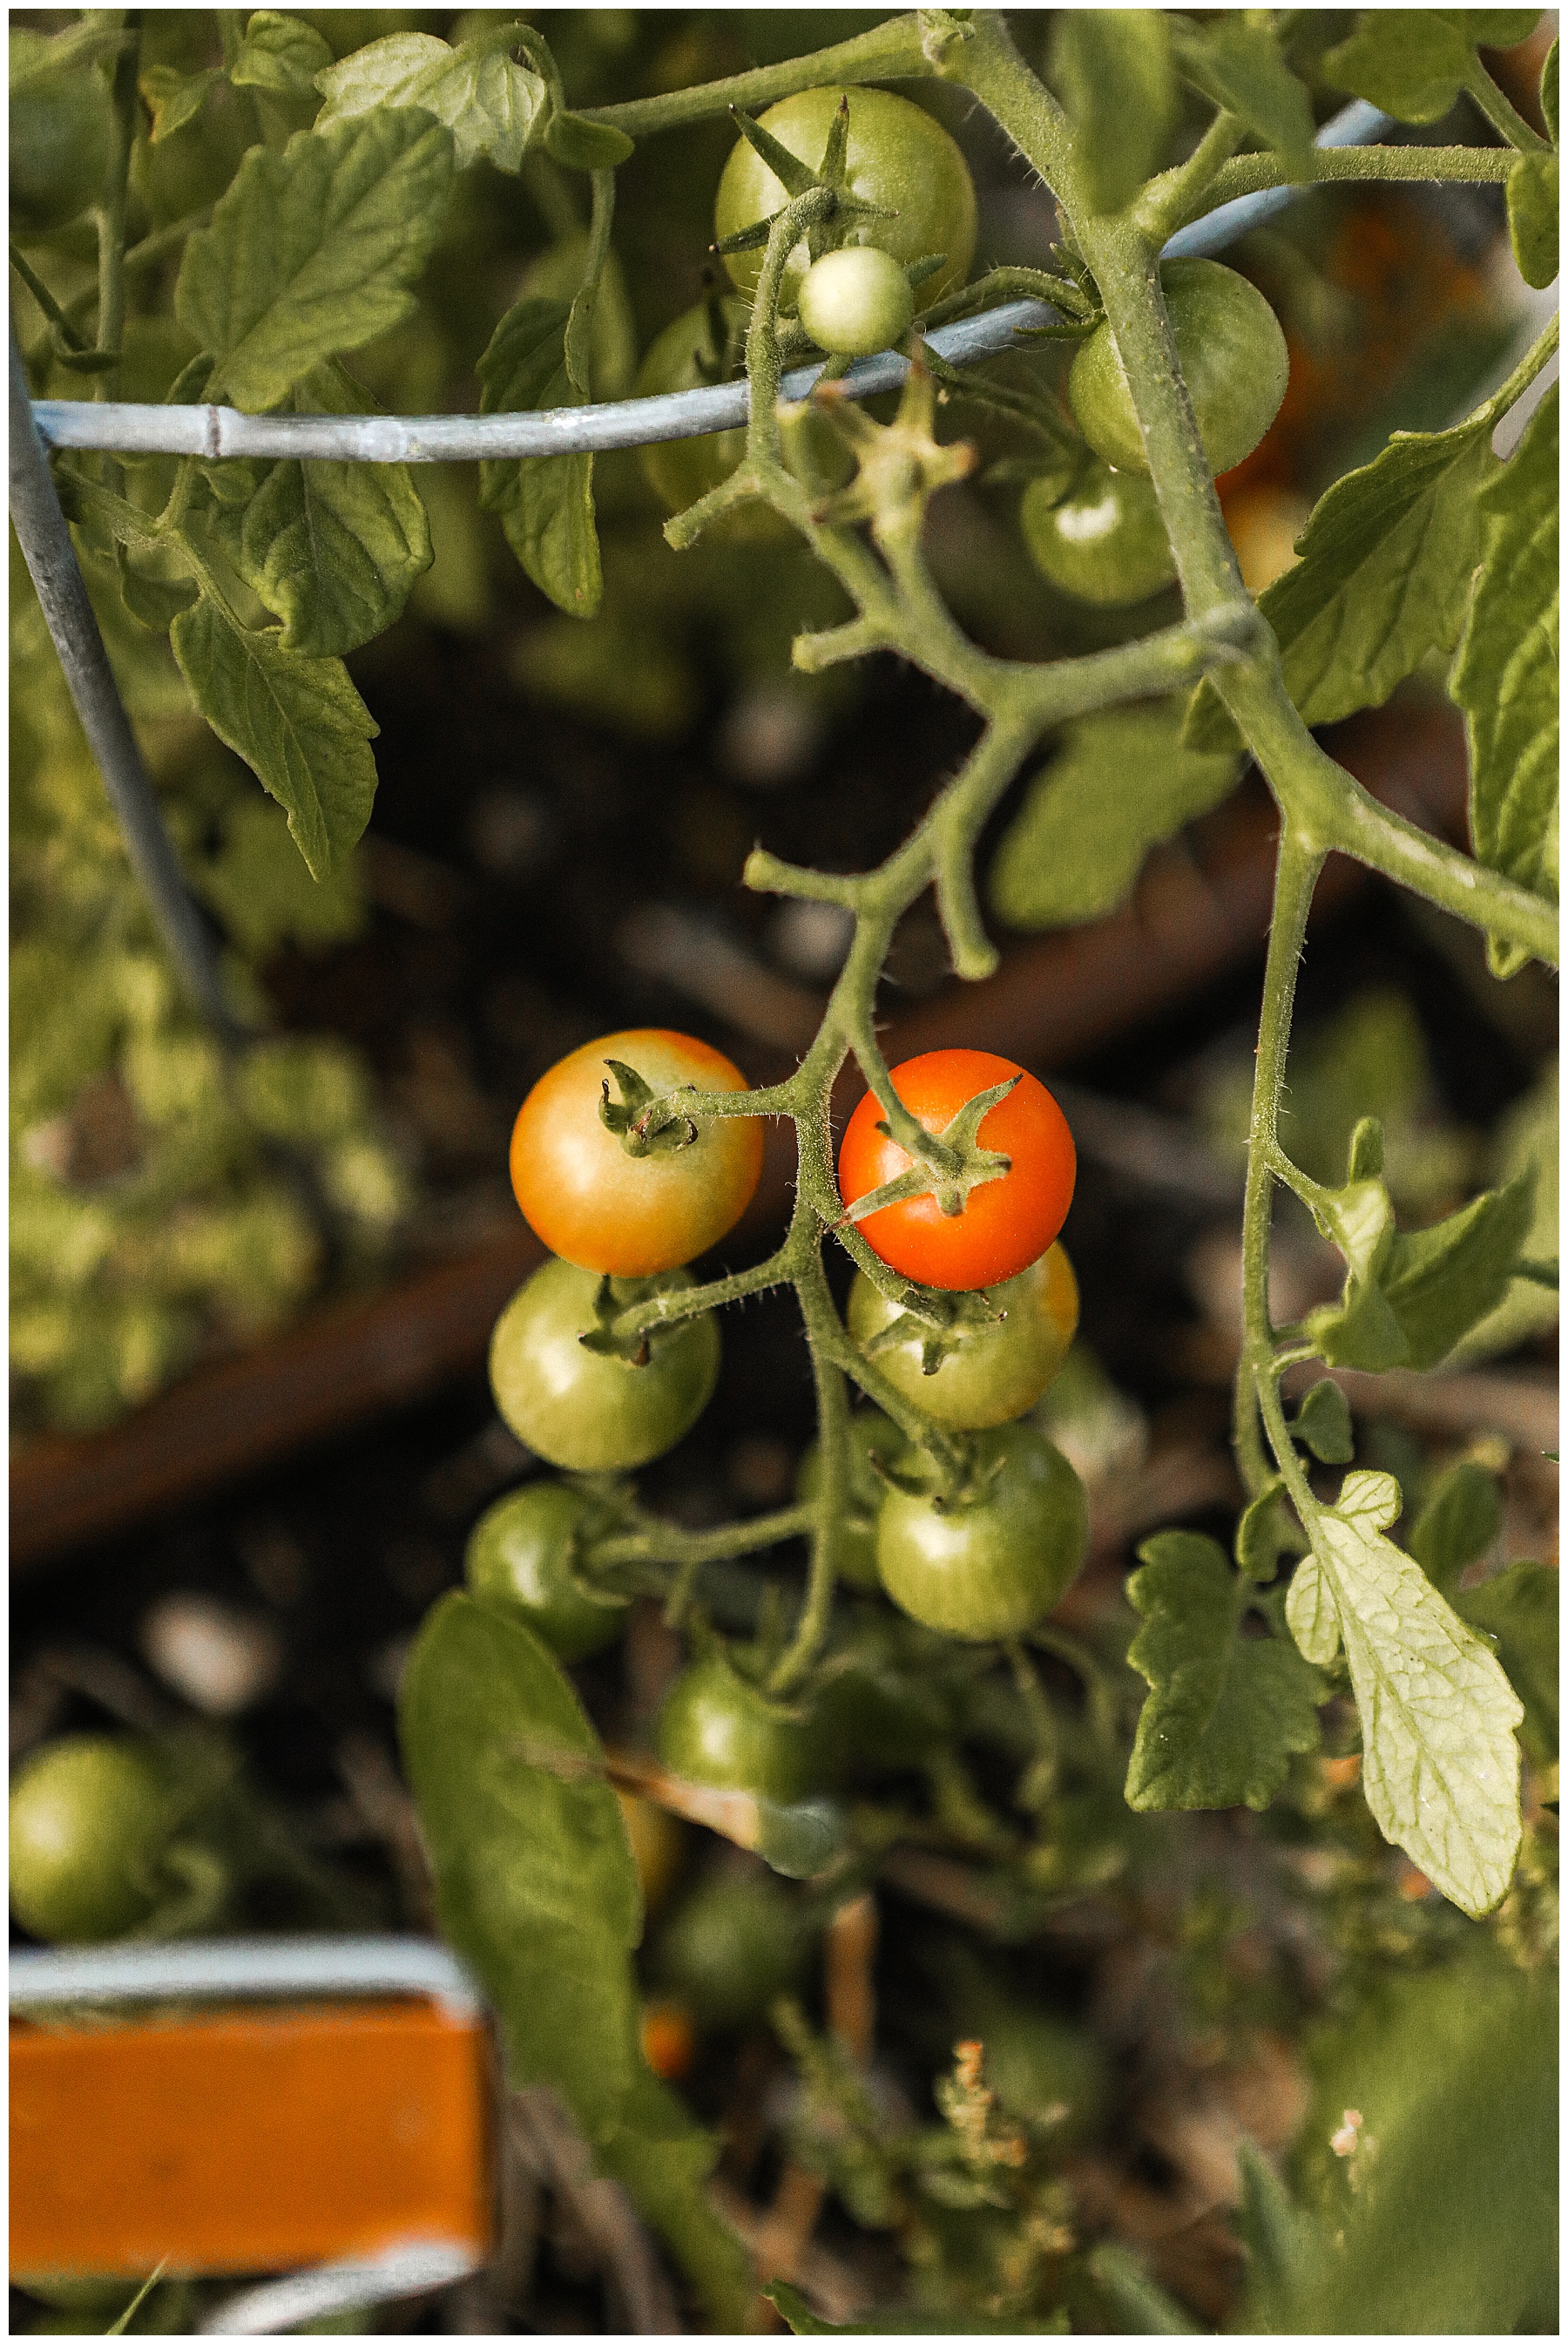 growing tomatoes from seeds